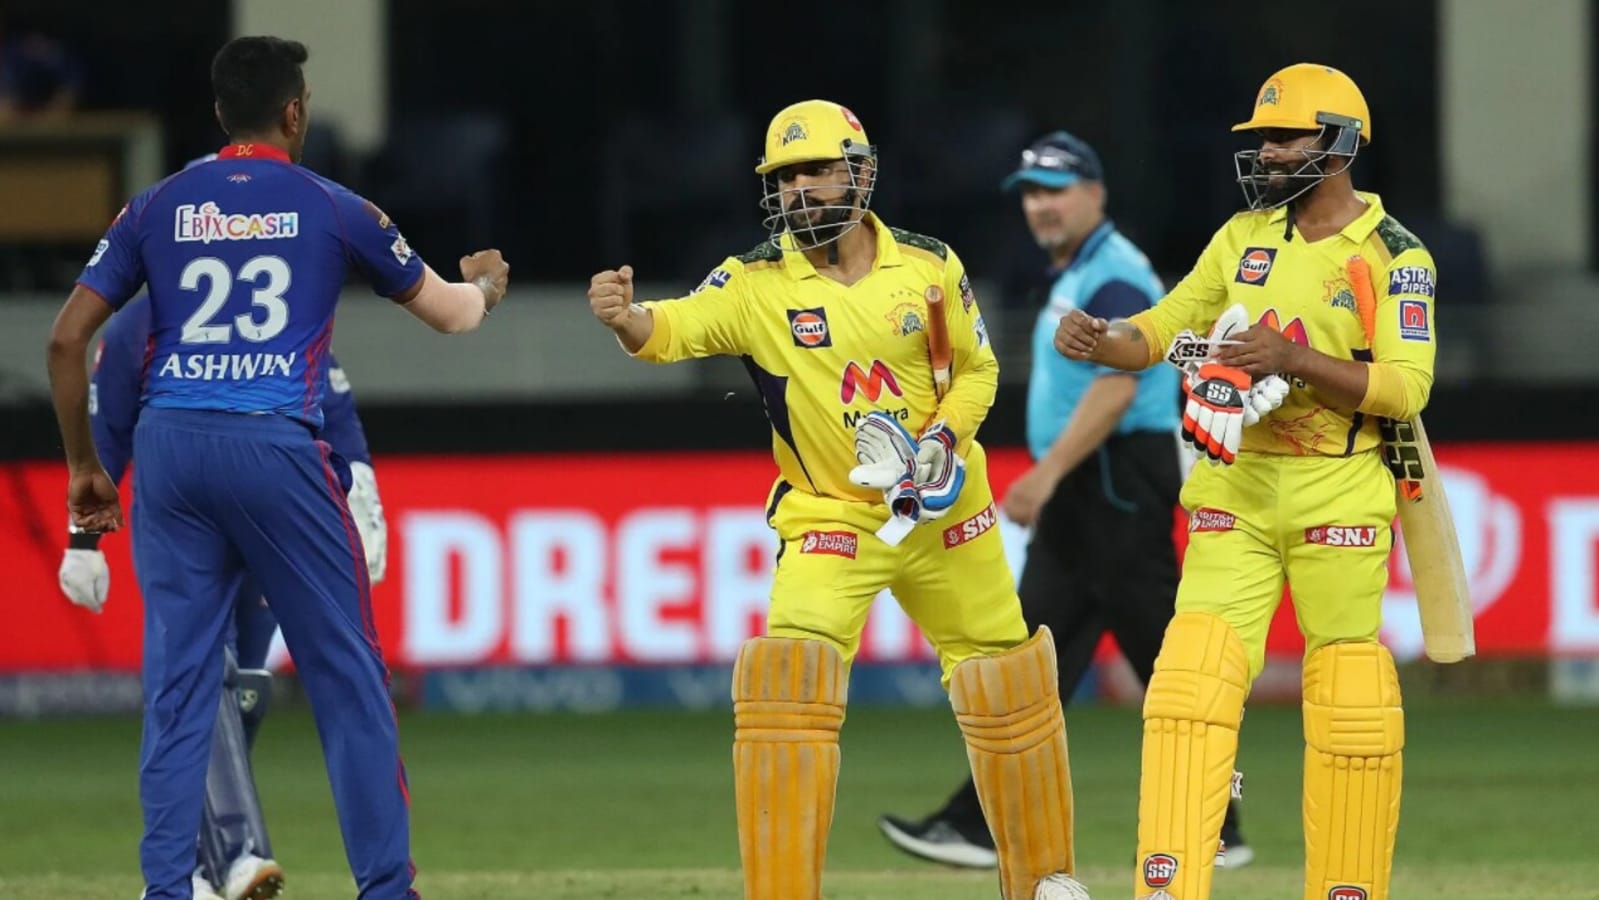 DC vs CSK Highlights, IPL 2021 Qualifier 1: Dhoni's cameo takes Chennai to  final as CSK beat Delhi by 4 wickets in Dubai | Hindustan Times